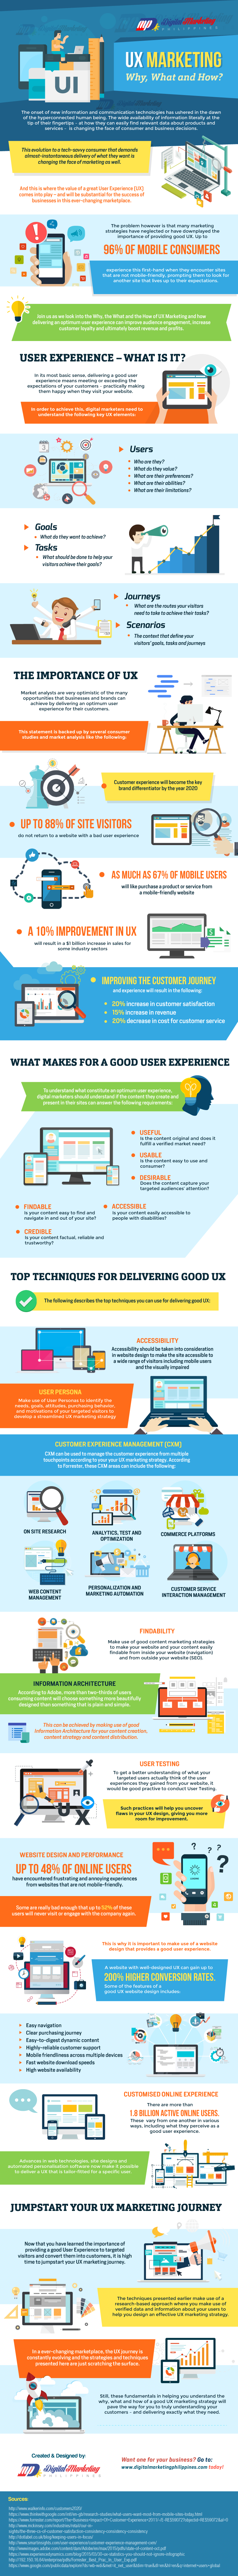 UX Marketing – Why, What and How? (Infographic) - An Infographic from Digital Marketing Philippines